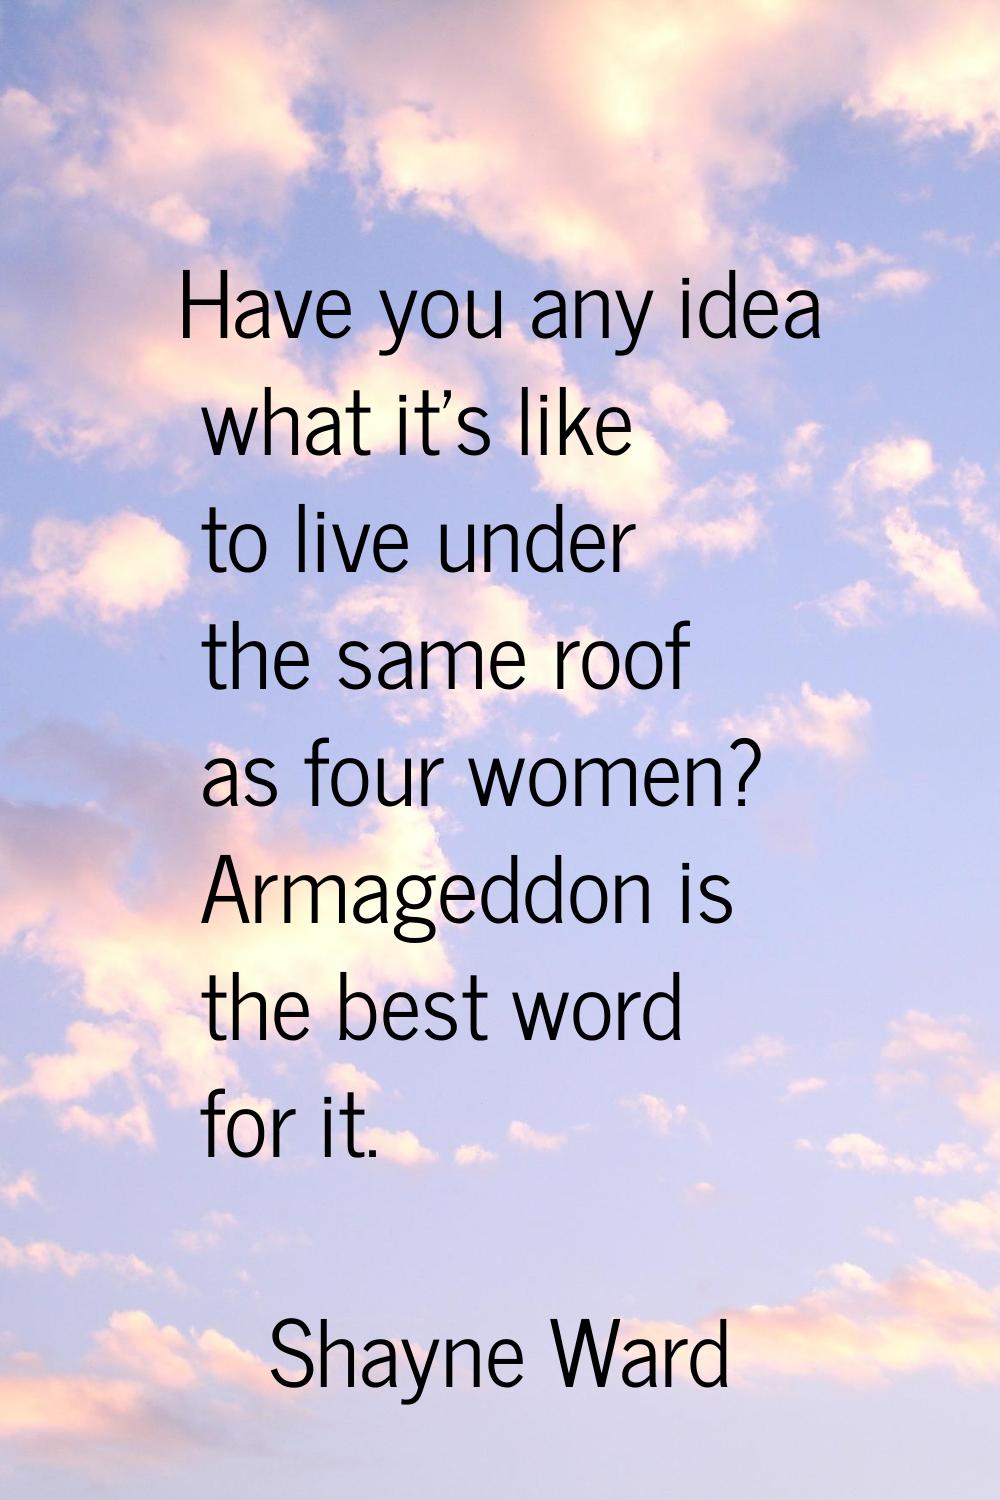 Have you any idea what it's like to live under the same roof as four women? Armageddon is the best 